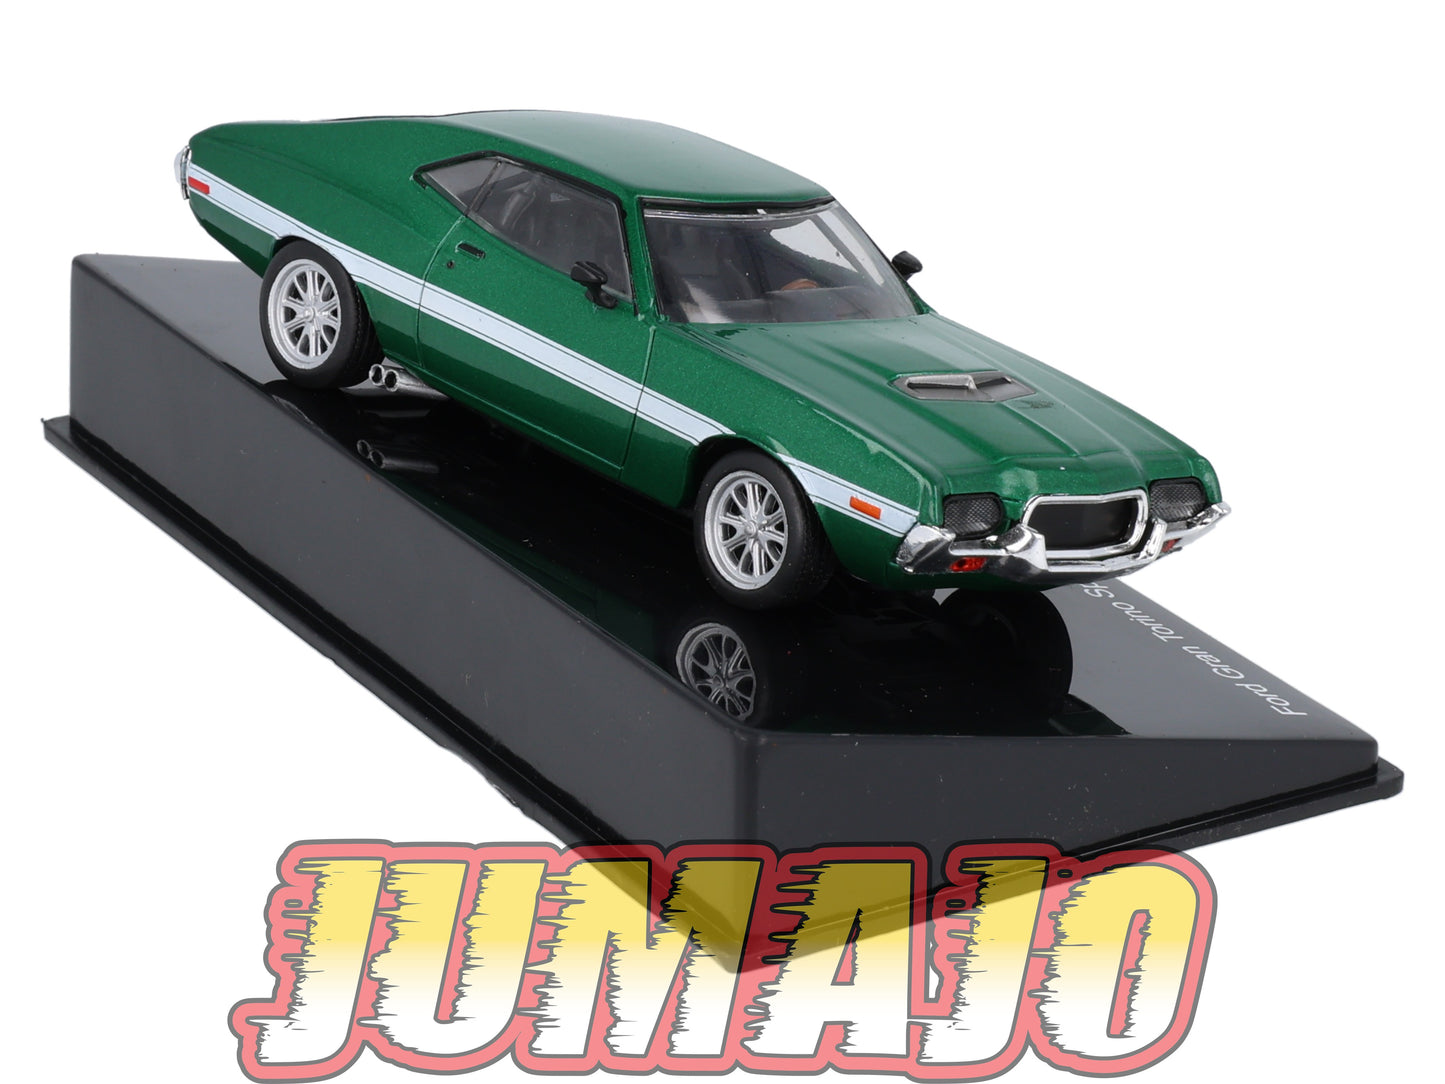 FF41 Voiture 1/43 IXO altaya Fast and Furious : Ford Gran Torino Sport